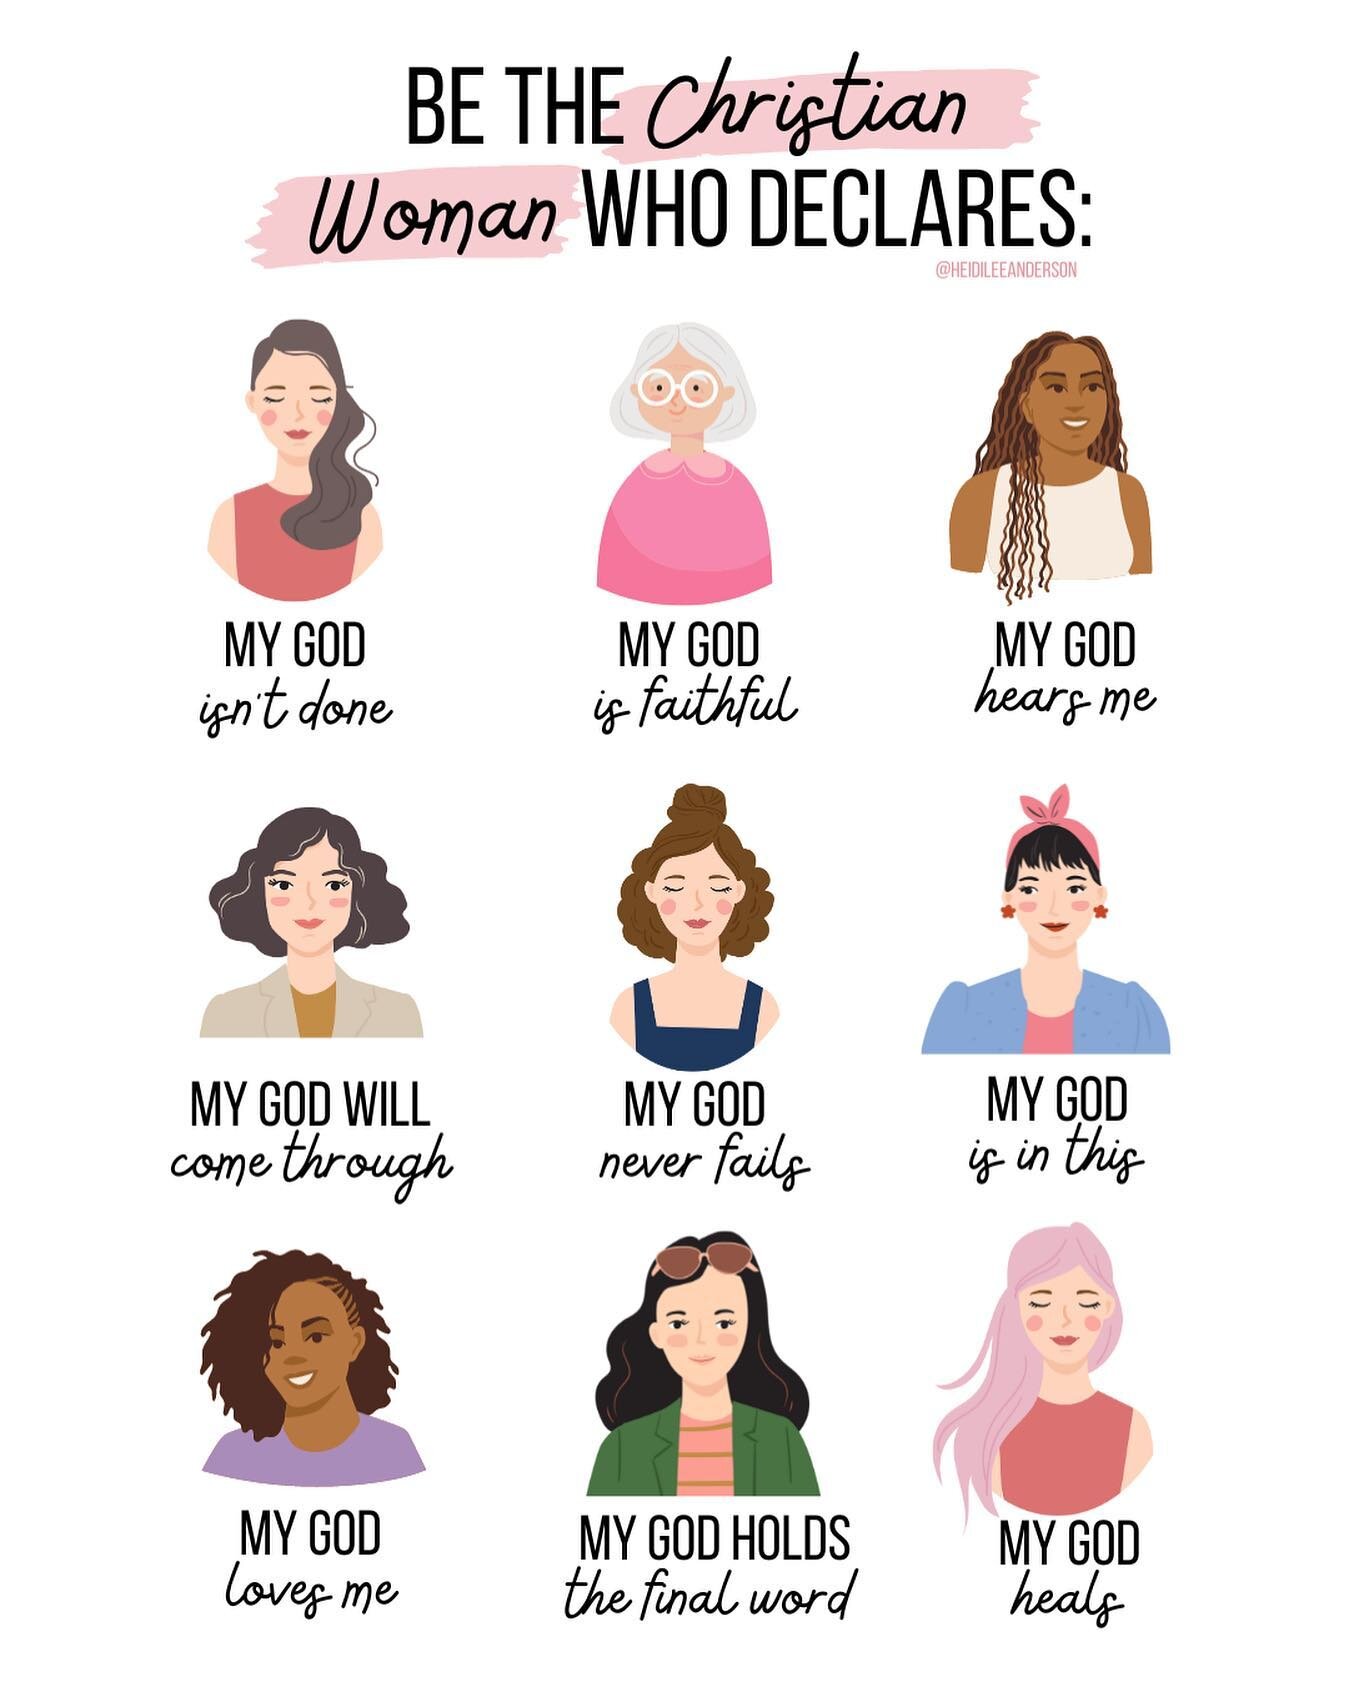 Which one are you choosing? She&rsquo;s no redhead, but I&rsquo;m 2nd row at the end&hellip;

❗️My God is in this❗️

Holding onto my Savior&rsquo;s final words recorded in Matthew 28:20: &ldquo;And be sure do this: I am with you always, even to the e